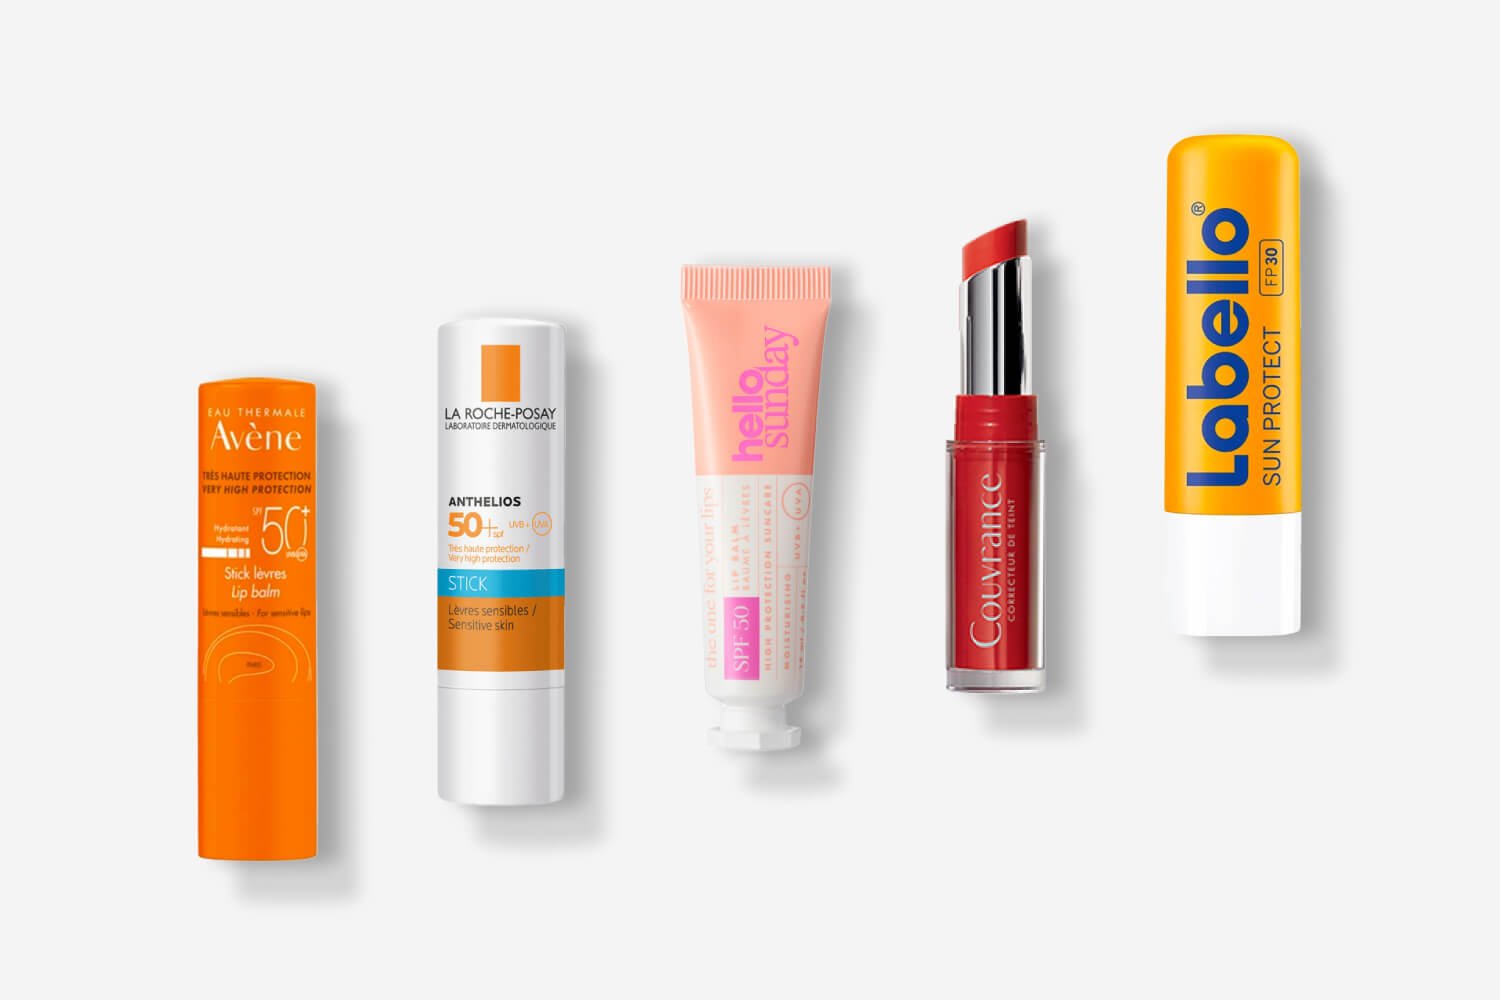 Our Top 9 Best Lip Balms With SPF